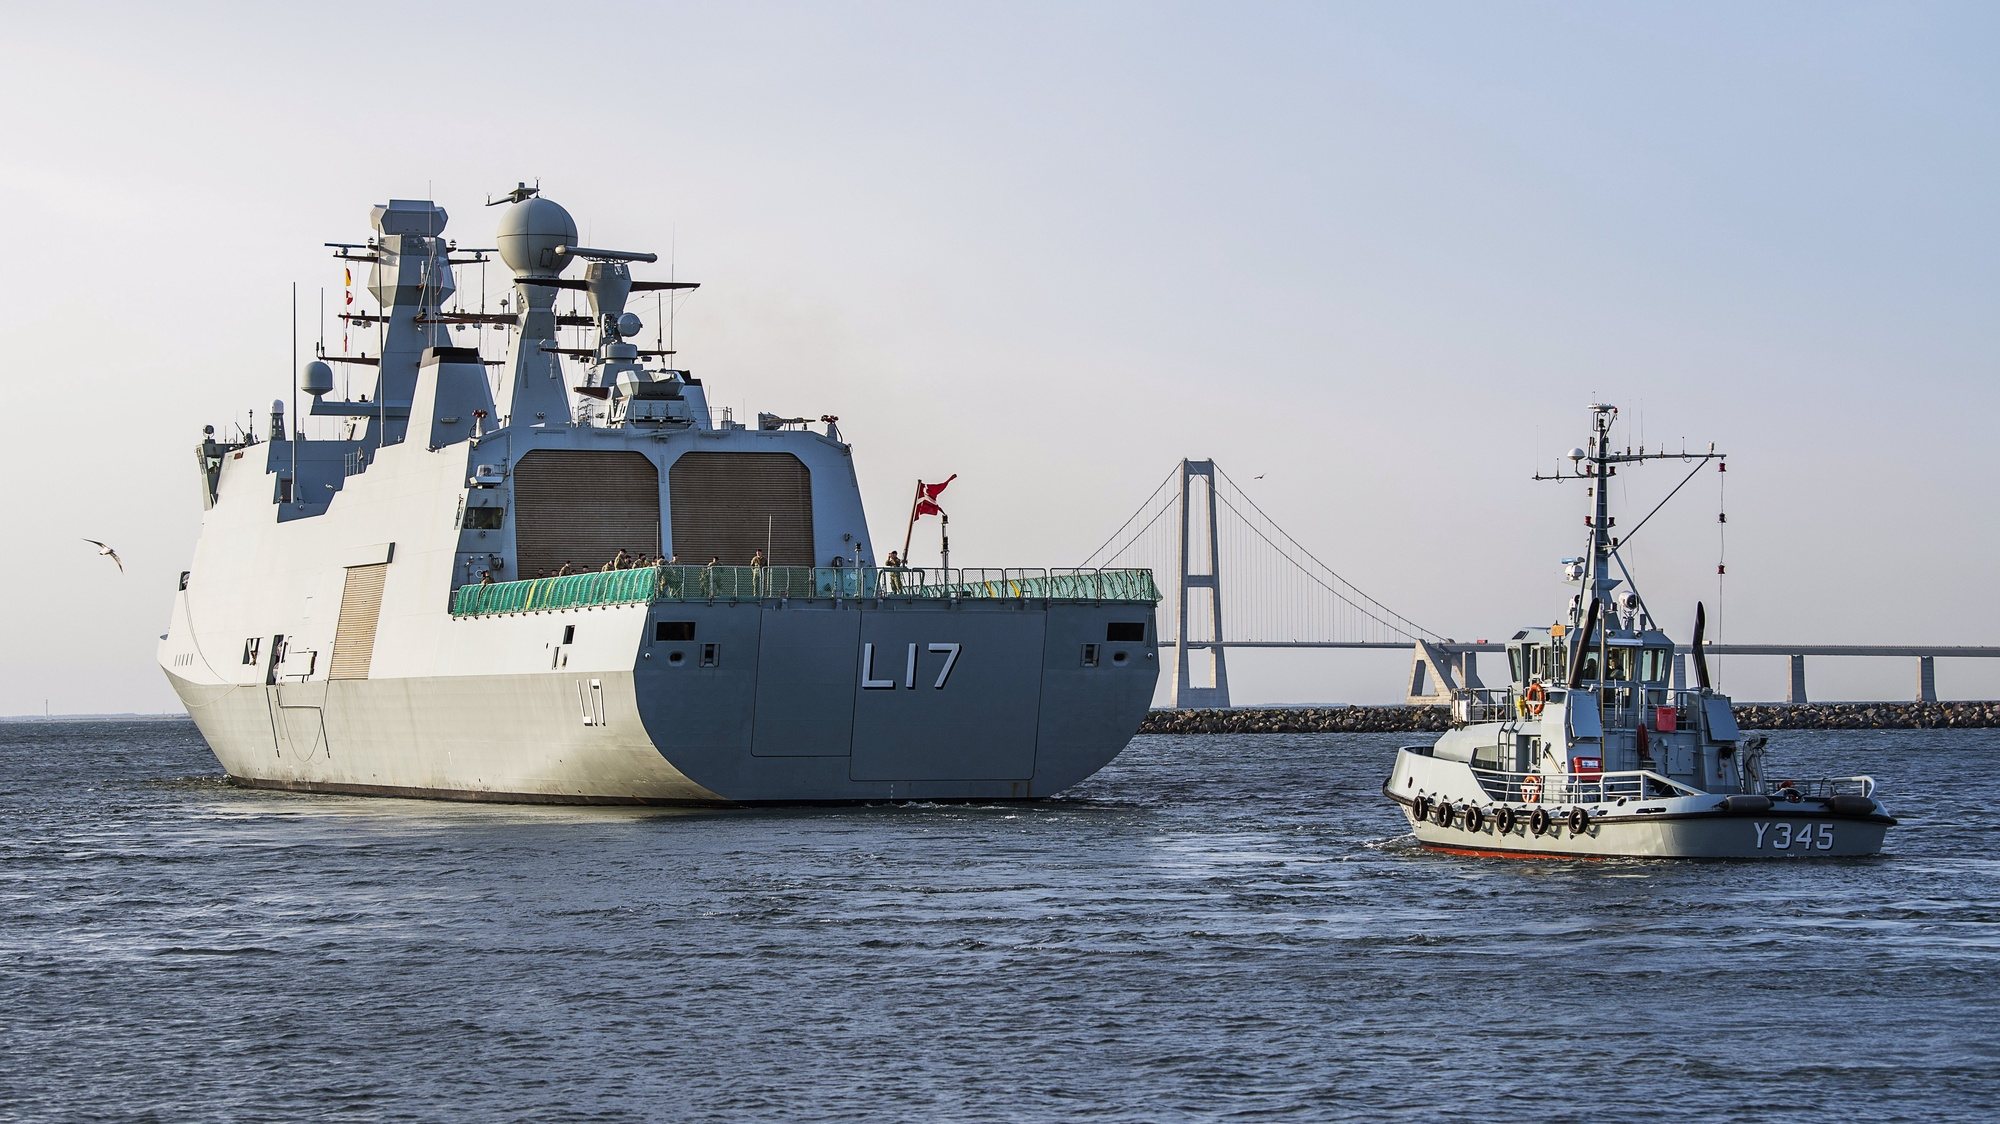 epa06427065 The Royal Danish Navy warship, an Absalon-class support ship &#039;Esbern Snare&#039; leaves the Korsoer naval base in Denmark to Estonia in Korsoer, Denmark, 209 January 2018. The warship, carrying infantry fighting vehicles, is part of the Danish contribution to the Nato&#039;s Enhanced Forward Presence in the Baltic Sea.  EPA/CLAUS BECH  DENMARK OUT